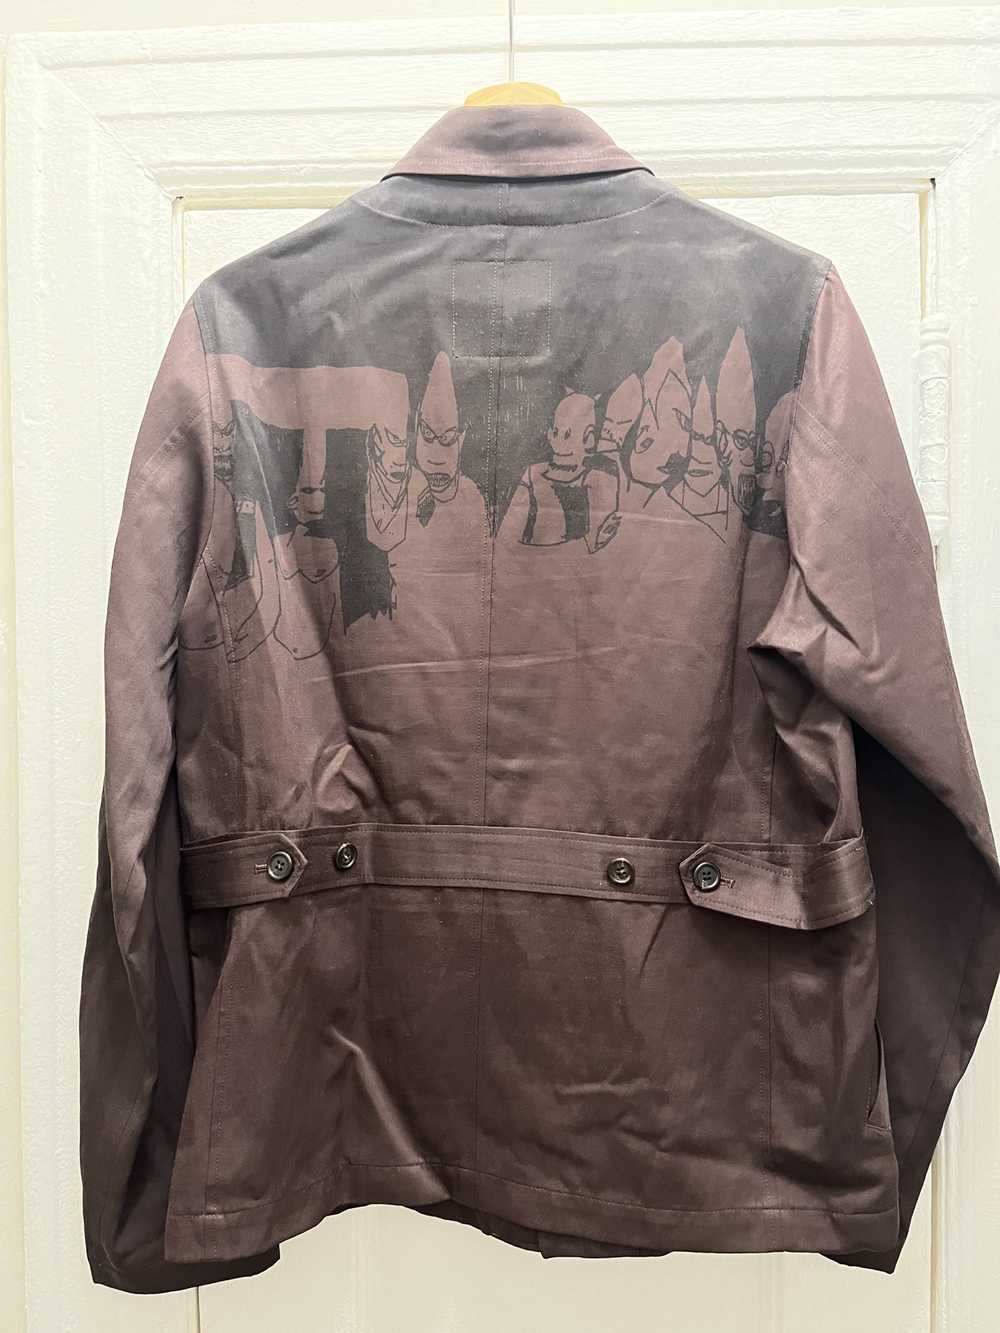 Undercover Undercover AW01 Futura Jacket - image 3